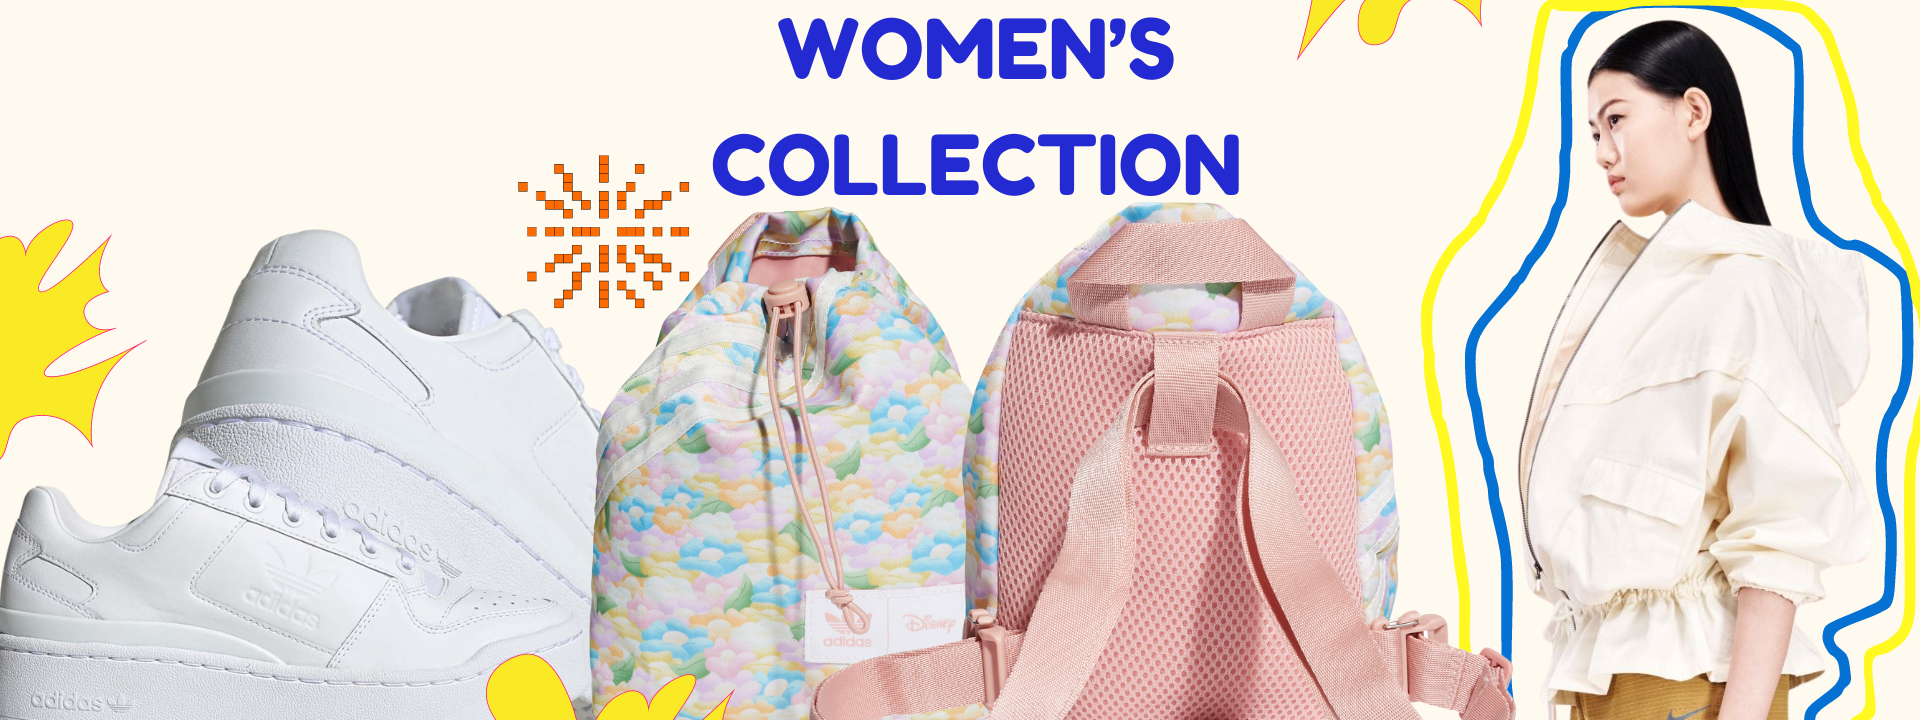 UP TO 40% WOMEN'S COLLECTION